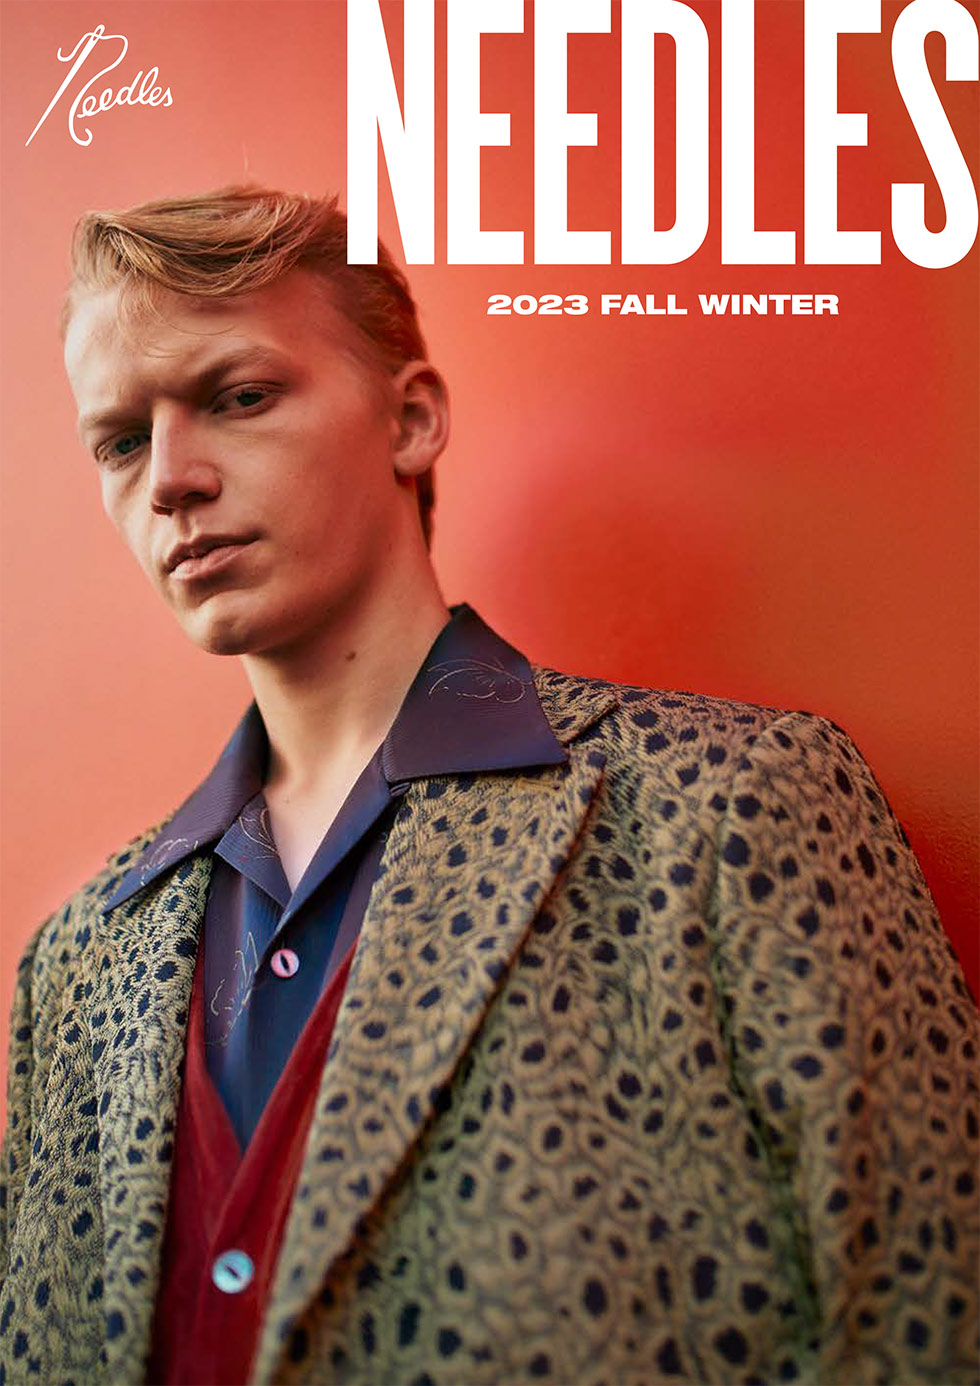 Needles official website | COLLECTIONS | 2023 Fall Winter